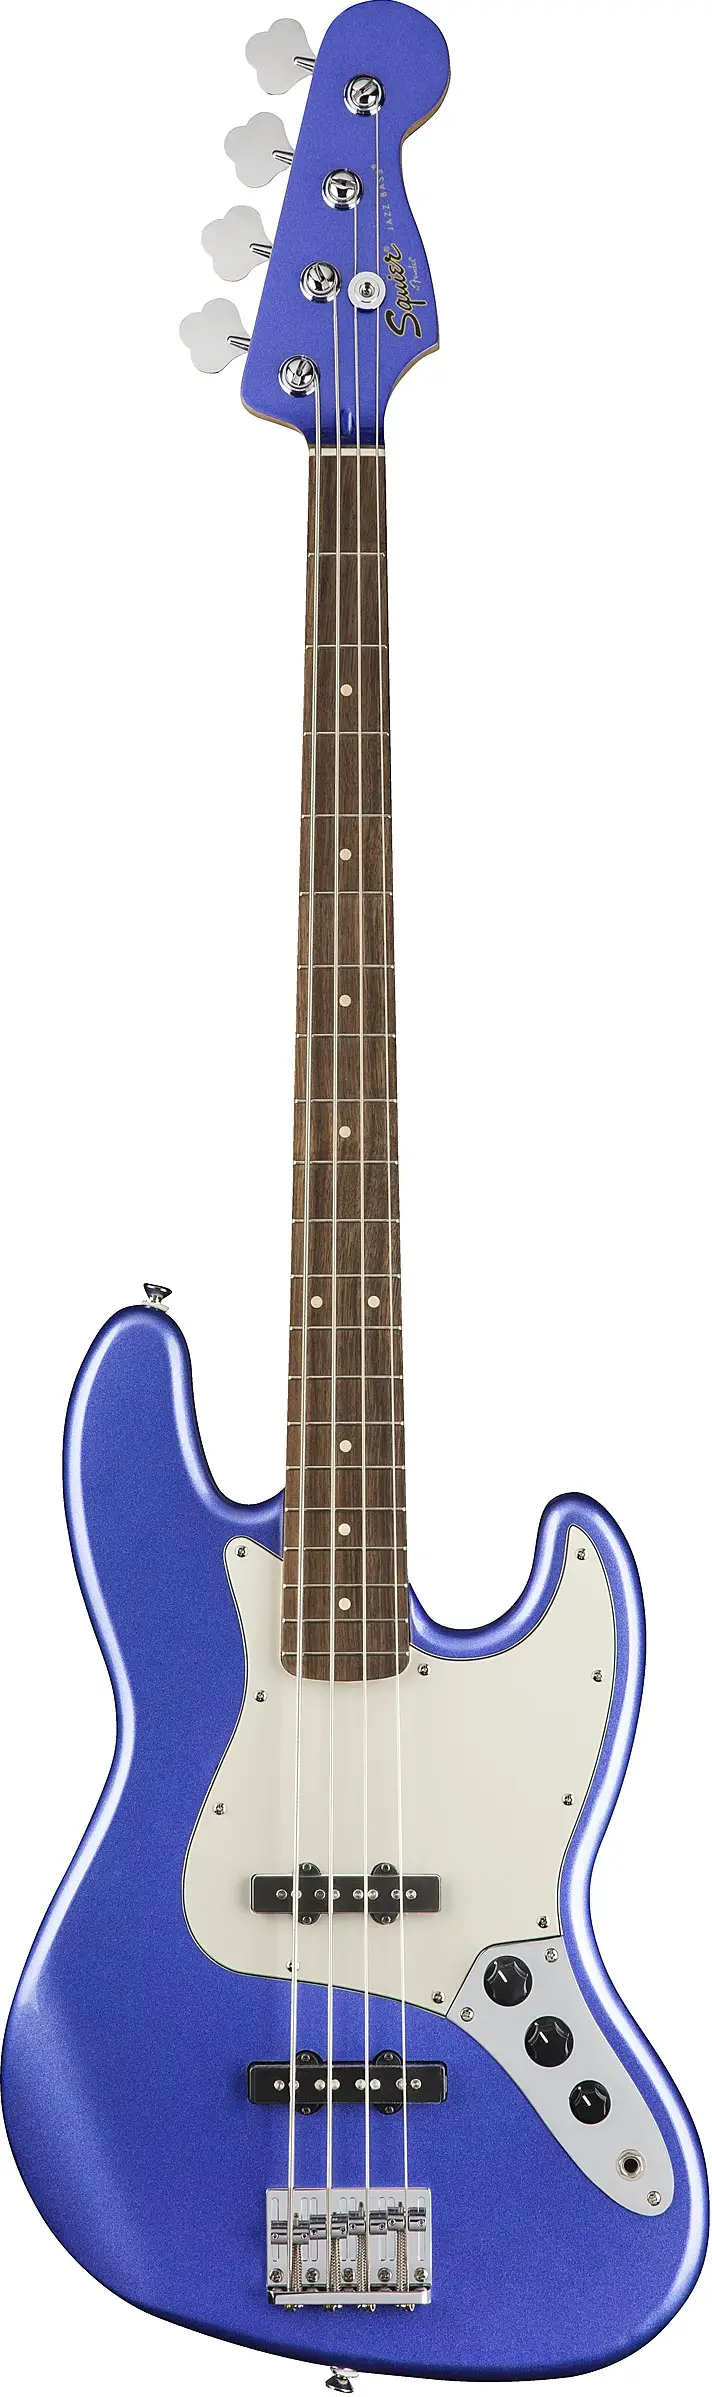 Contemporary Jazz Bass by Squier by Fender